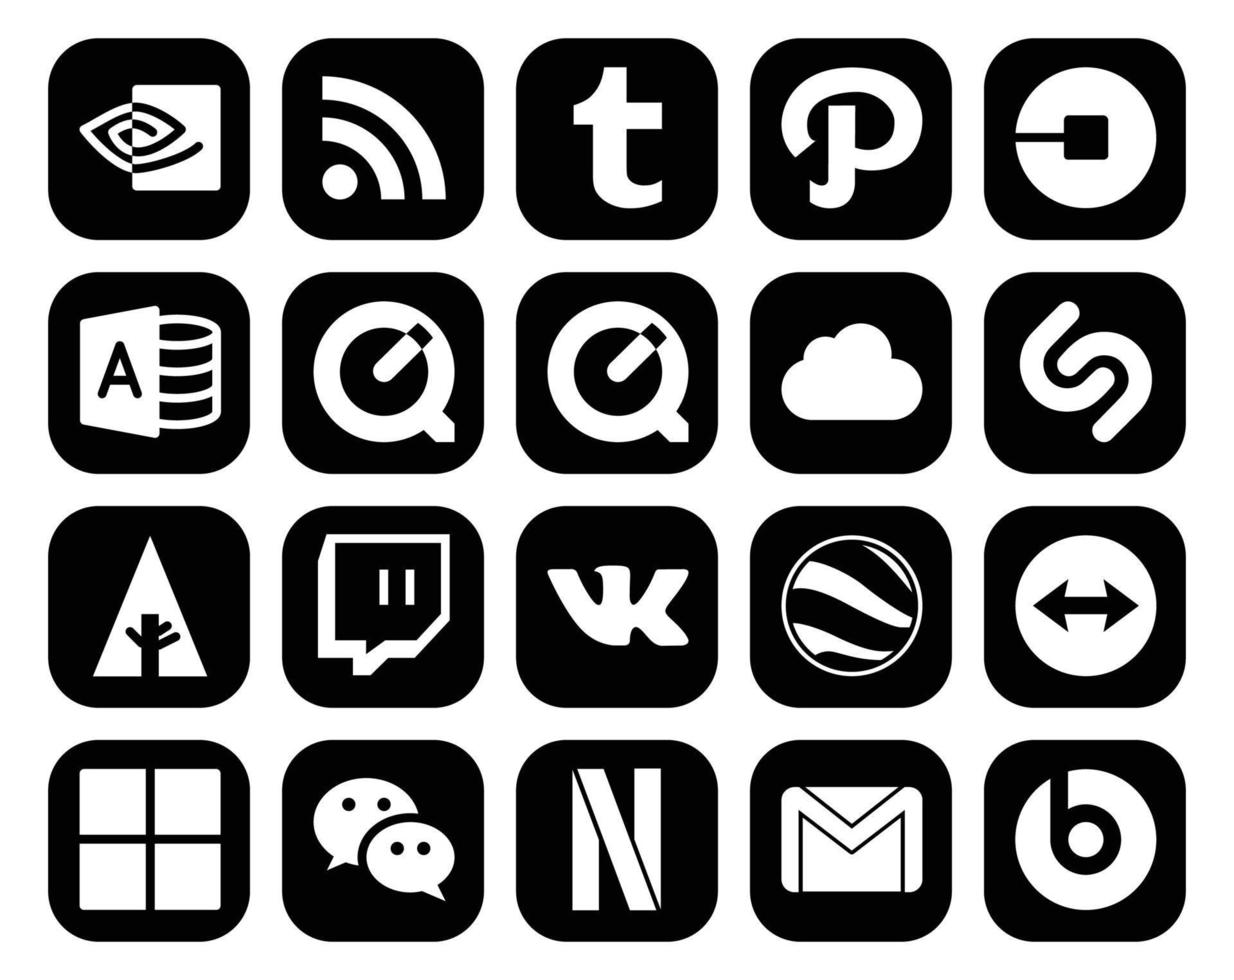 20 Social Media Icon Pack Including wechat teamviewer quicktime google earth twitch vector